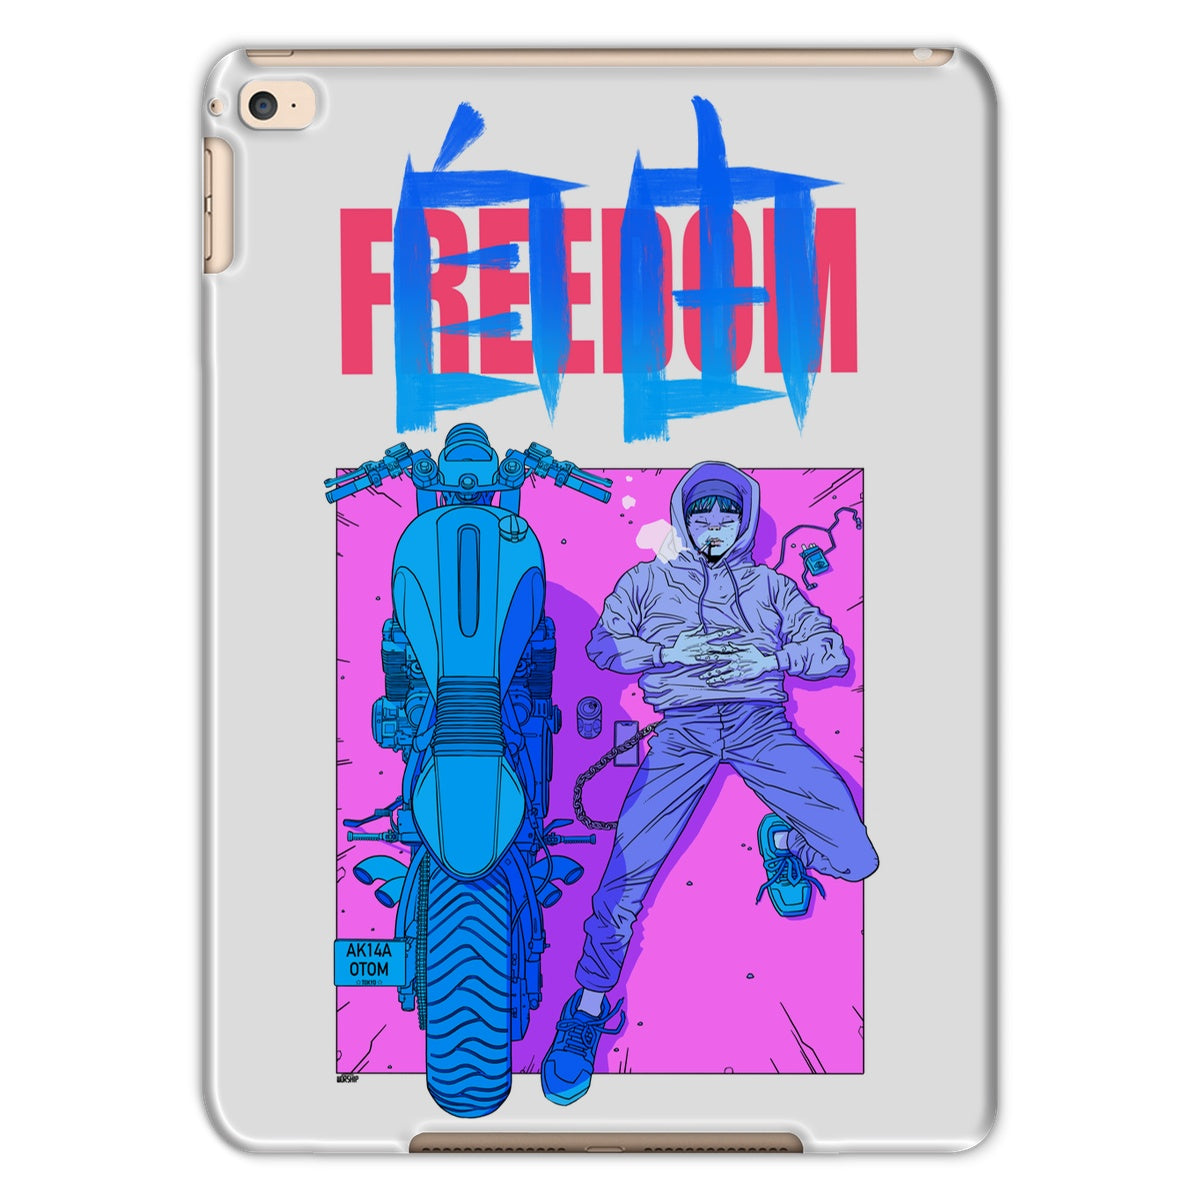 Unique and cool Gorillaz-style anime Tablet Case illustration 